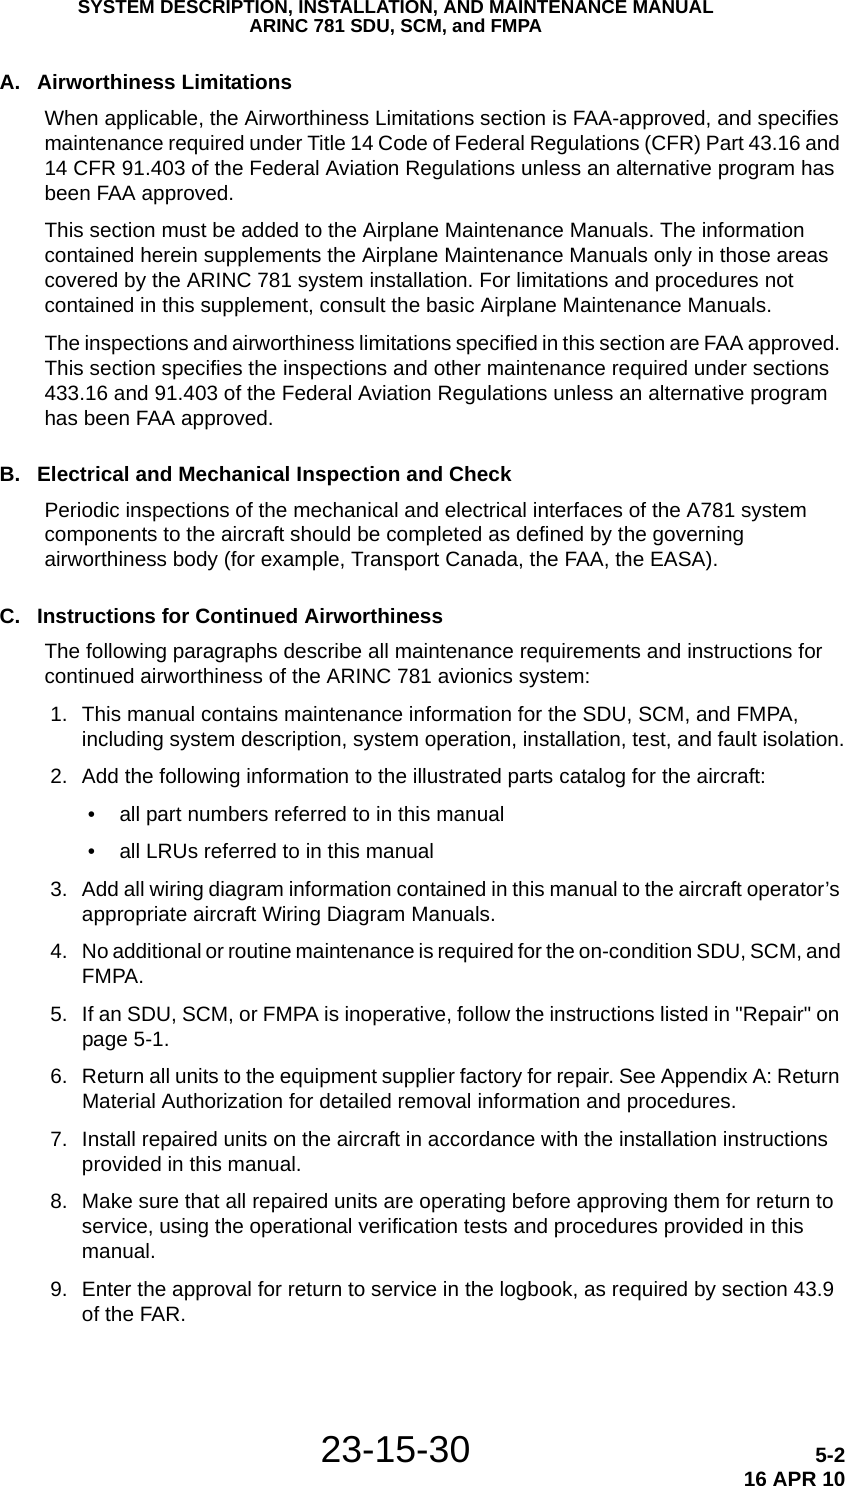 SYSTEM DESCRIPTION, INSTALLATION, AND MAINTENANCE MANUALARINC 781 SDU, SCM, and FMPA23-15-30 5-216 APR 10A. Airworthiness LimitationsWhen applicable, the Airworthiness Limitations section is FAA-approved, and specifies maintenance required under Title 14 Code of Federal Regulations (CFR) Part 43.16 and 14 CFR 91.403 of the Federal Aviation Regulations unless an alternative program has been FAA approved.This section must be added to the Airplane Maintenance Manuals. The information contained herein supplements the Airplane Maintenance Manuals only in those areas covered by the ARINC 781 system installation. For limitations and procedures not contained in this supplement, consult the basic Airplane Maintenance Manuals.The inspections and airworthiness limitations specified in this section are FAA approved. This section specifies the inspections and other maintenance required under sections 433.16 and 91.403 of the Federal Aviation Regulations unless an alternative program has been FAA approved.B. Electrical and Mechanical Inspection and CheckPeriodic inspections of the mechanical and electrical interfaces of the A781 system components to the aircraft should be completed as defined by the governing airworthiness body (for example, Transport Canada, the FAA, the EASA). C. Instructions for Continued AirworthinessThe following paragraphs describe all maintenance requirements and instructions for continued airworthiness of the ARINC 781 avionics system: 1. This manual contains maintenance information for the SDU, SCM, and FMPA, including system description, system operation, installation, test, and fault isolation. 2. Add the following information to the illustrated parts catalog for the aircraft: • all part numbers referred to in this manual • all LRUs referred to in this manual 3. Add all wiring diagram information contained in this manual to the aircraft operator’s appropriate aircraft Wiring Diagram Manuals. 4. No additional or routine maintenance is required for the on-condition SDU, SCM, and FMPA. 5. If an SDU, SCM, or FMPA is inoperative, follow the instructions listed in &quot;Repair&quot; on page 5-1. 6. Return all units to the equipment supplier factory for repair. See Appendix A: Return Material Authorization for detailed removal information and procedures. 7. Install repaired units on the aircraft in accordance with the installation instructions provided in this manual. 8. Make sure that all repaired units are operating before approving them for return to service, using the operational verification tests and procedures provided in this manual.  9. Enter the approval for return to service in the logbook, as required by section 43.9 of the FAR.